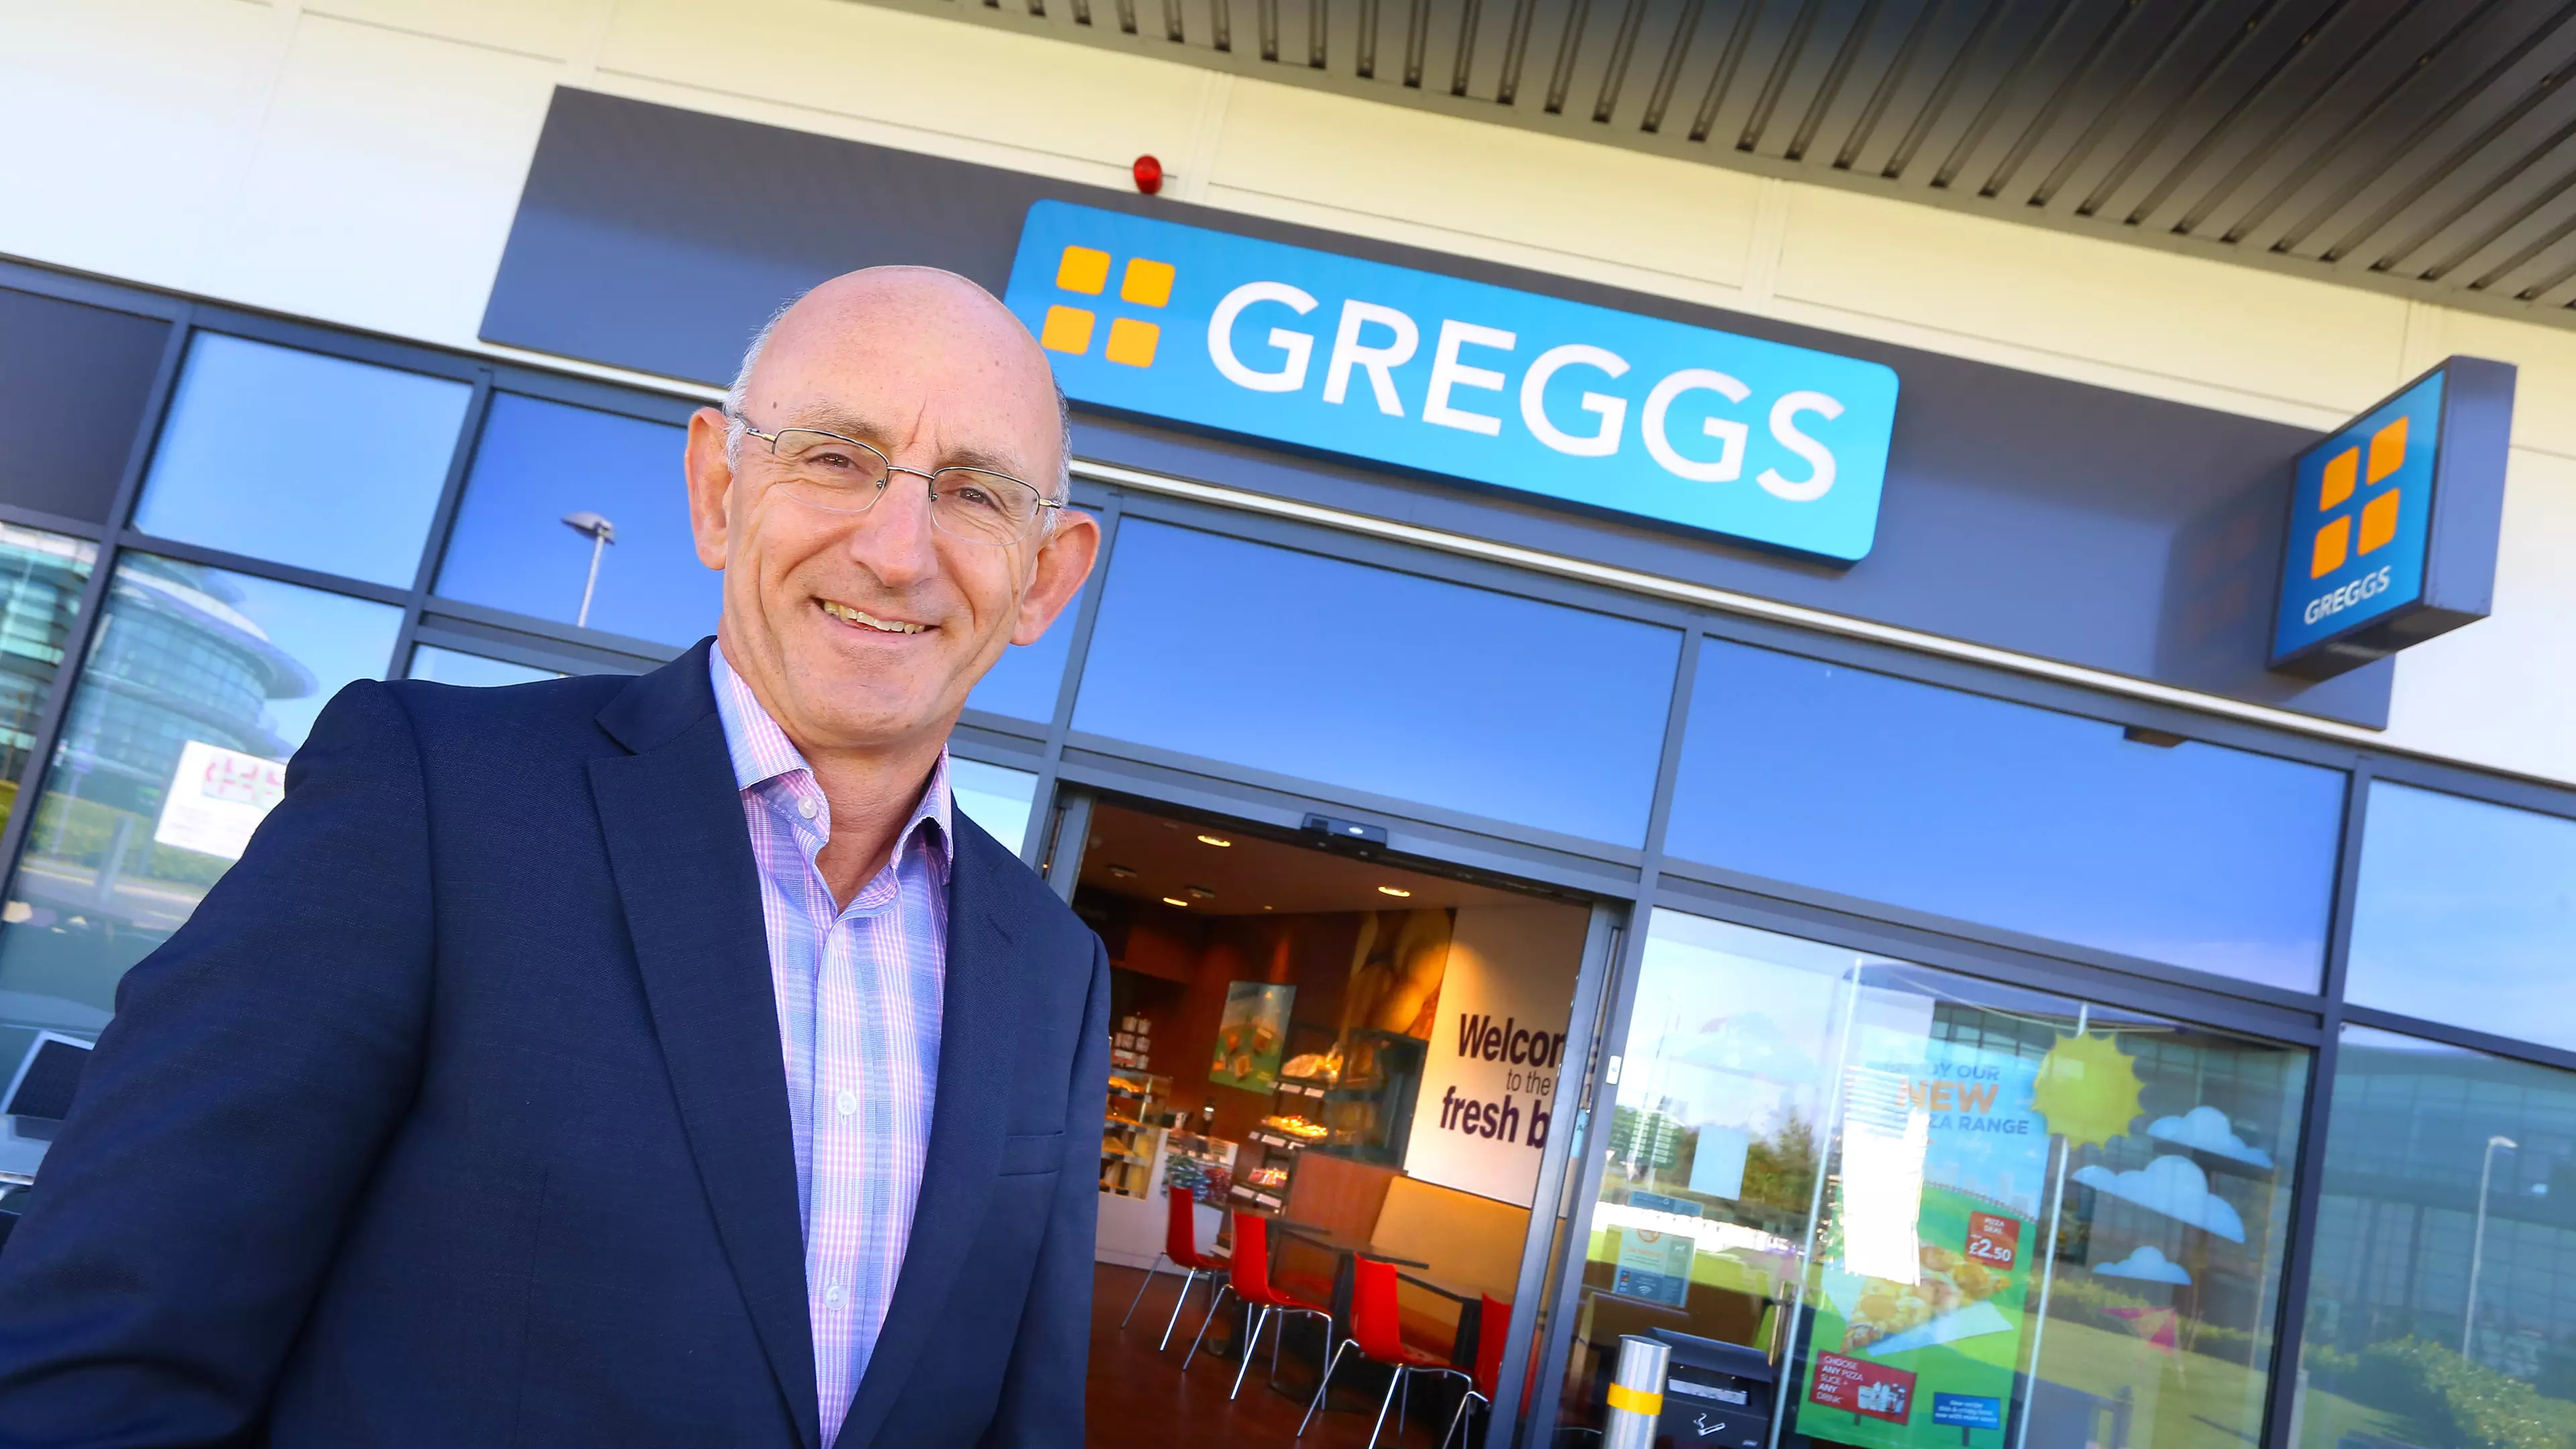 Greggs Boss Is Going Vegan After Watching Netflix Documentary The Game Changers